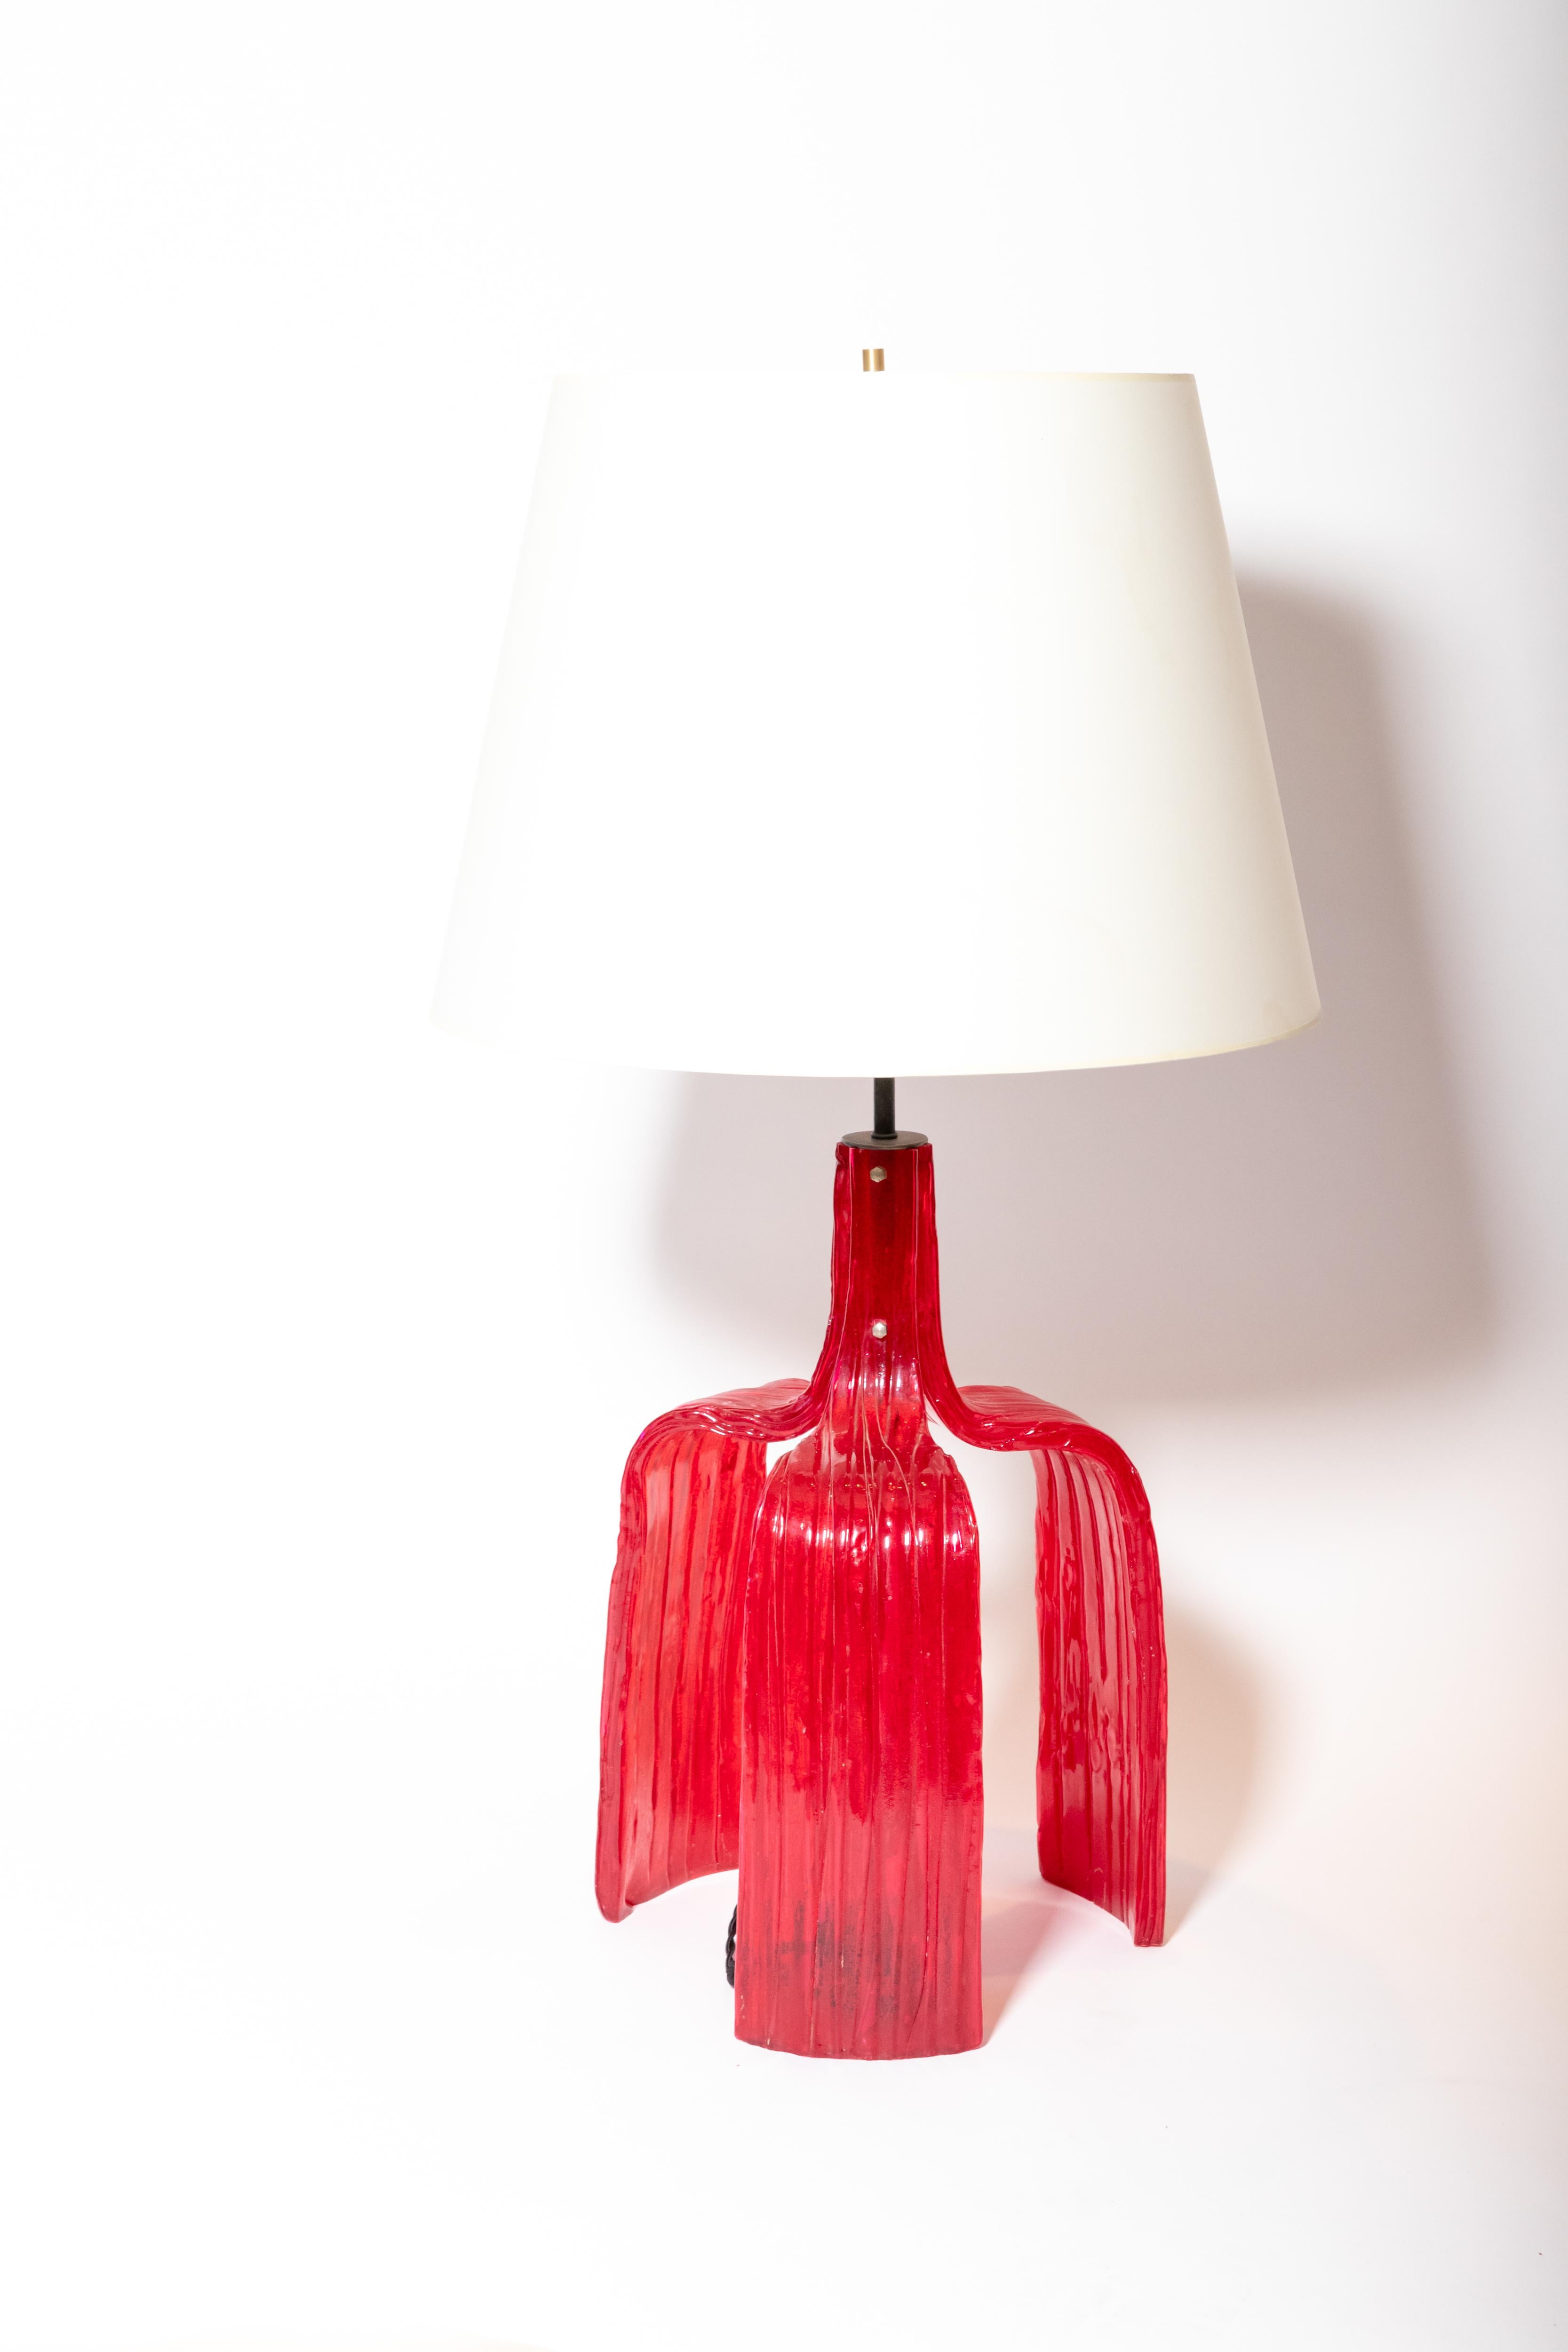 Vintage French Red Resin Bedside Table Lamp 1